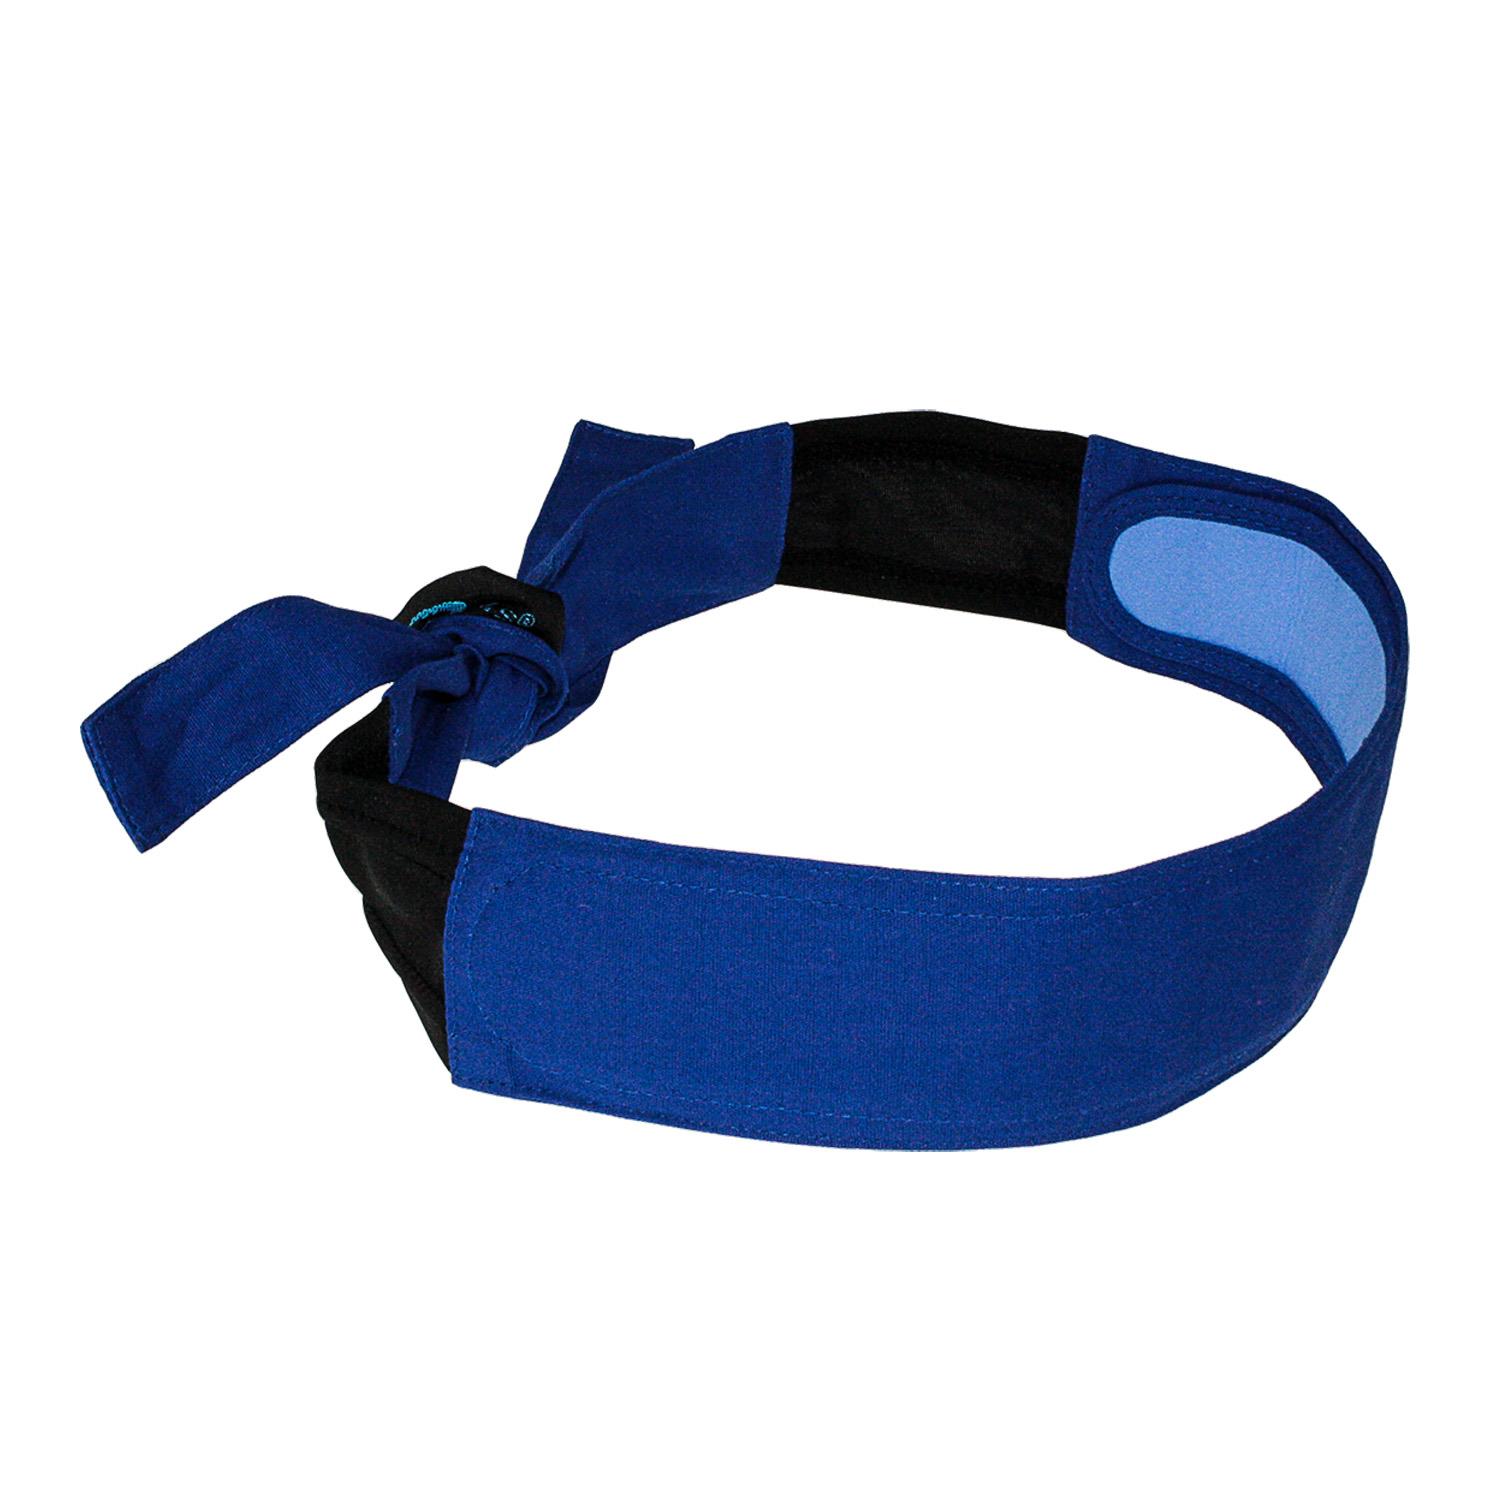 ARCTIC RADWEAR COOLING HEADBAND - Cooling Apparel and Accessories